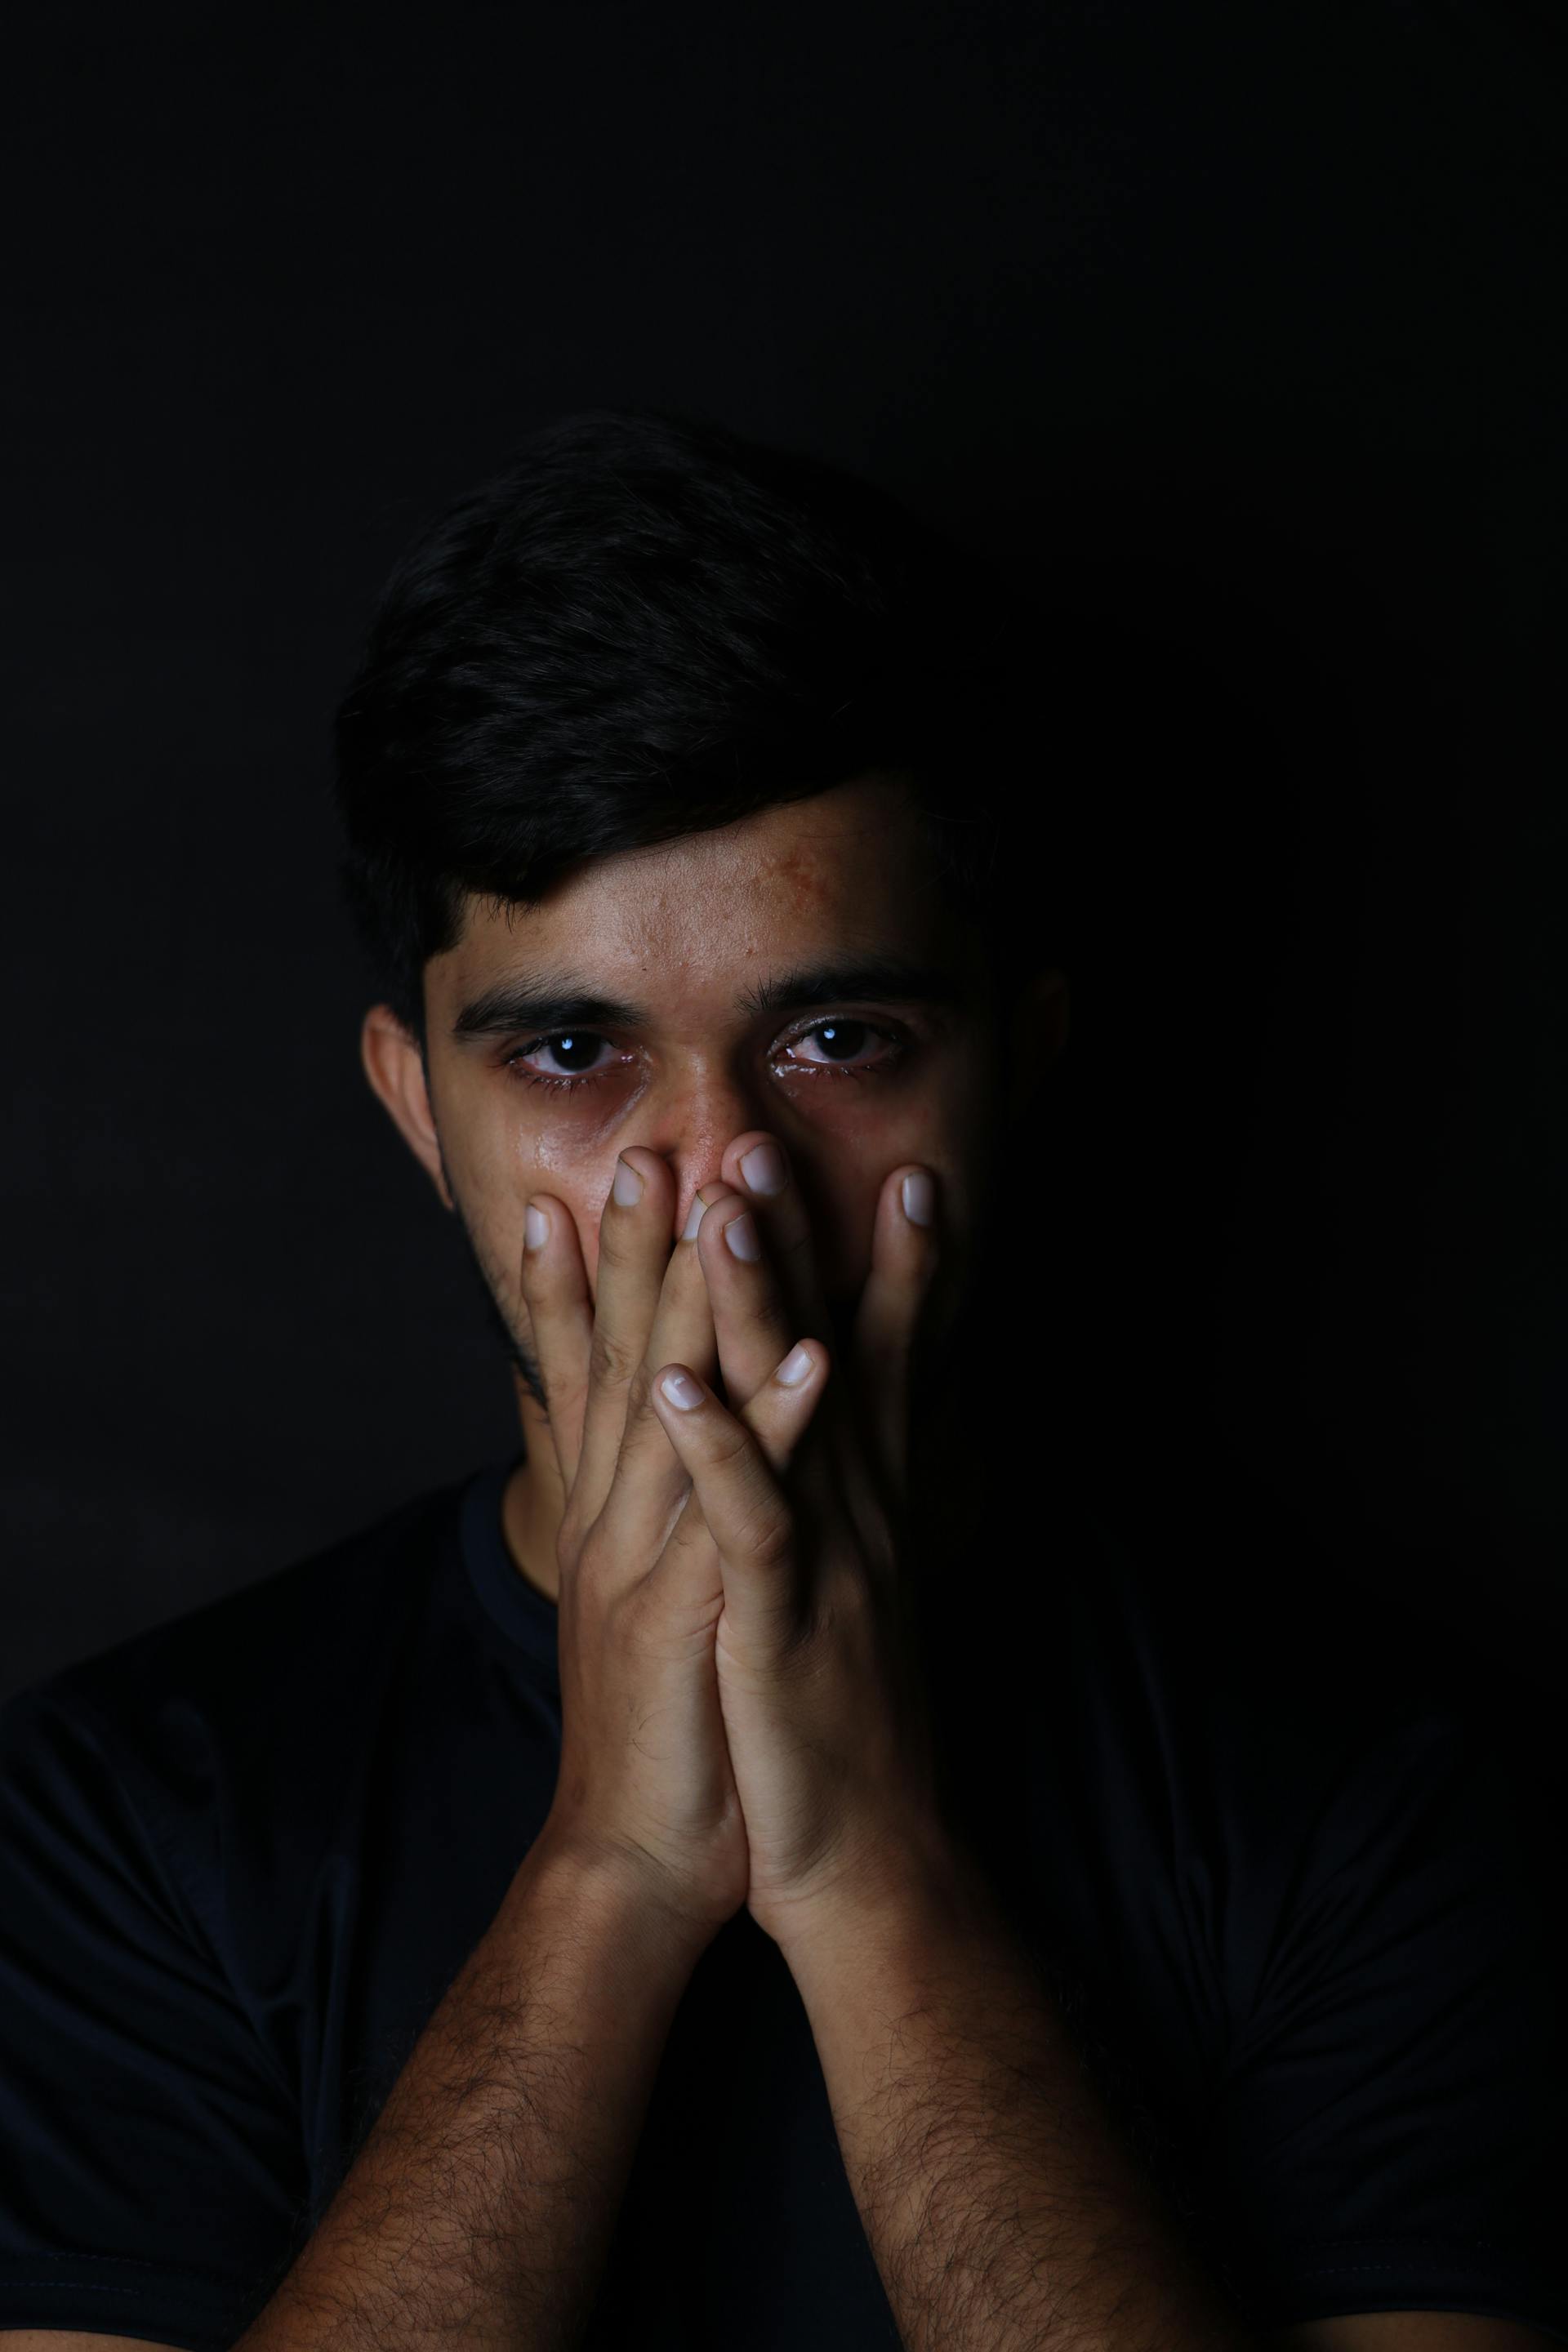 A broken man covering his mouth with his hands | Source: Pexels